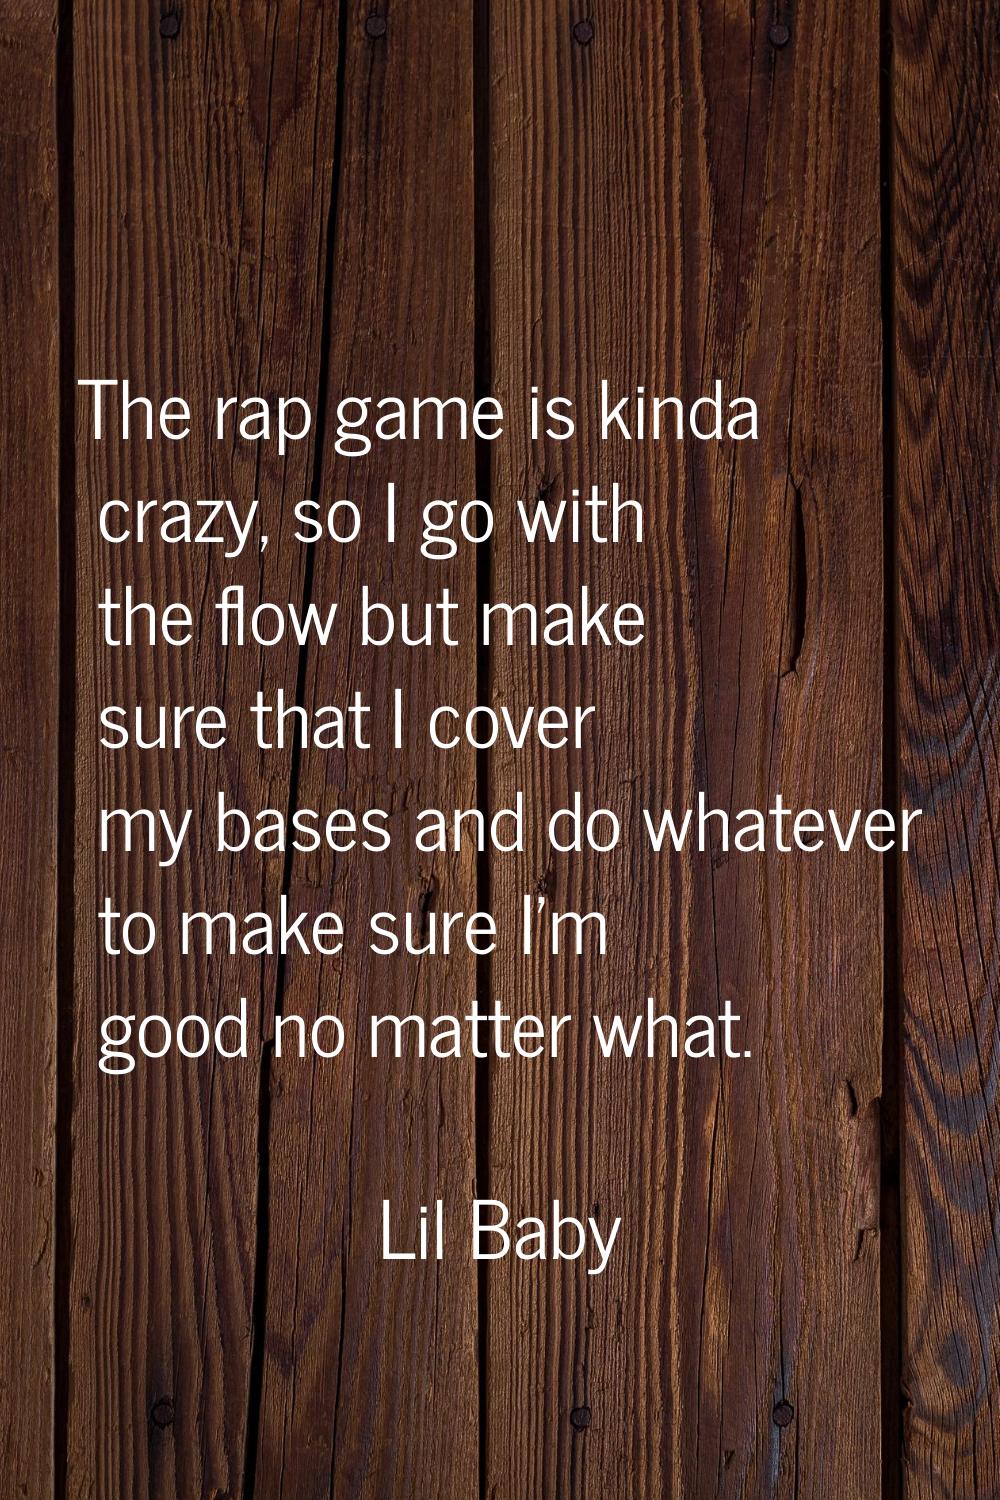 The rap game is kinda crazy, so I go with the flow but make sure that I cover my bases and do whate